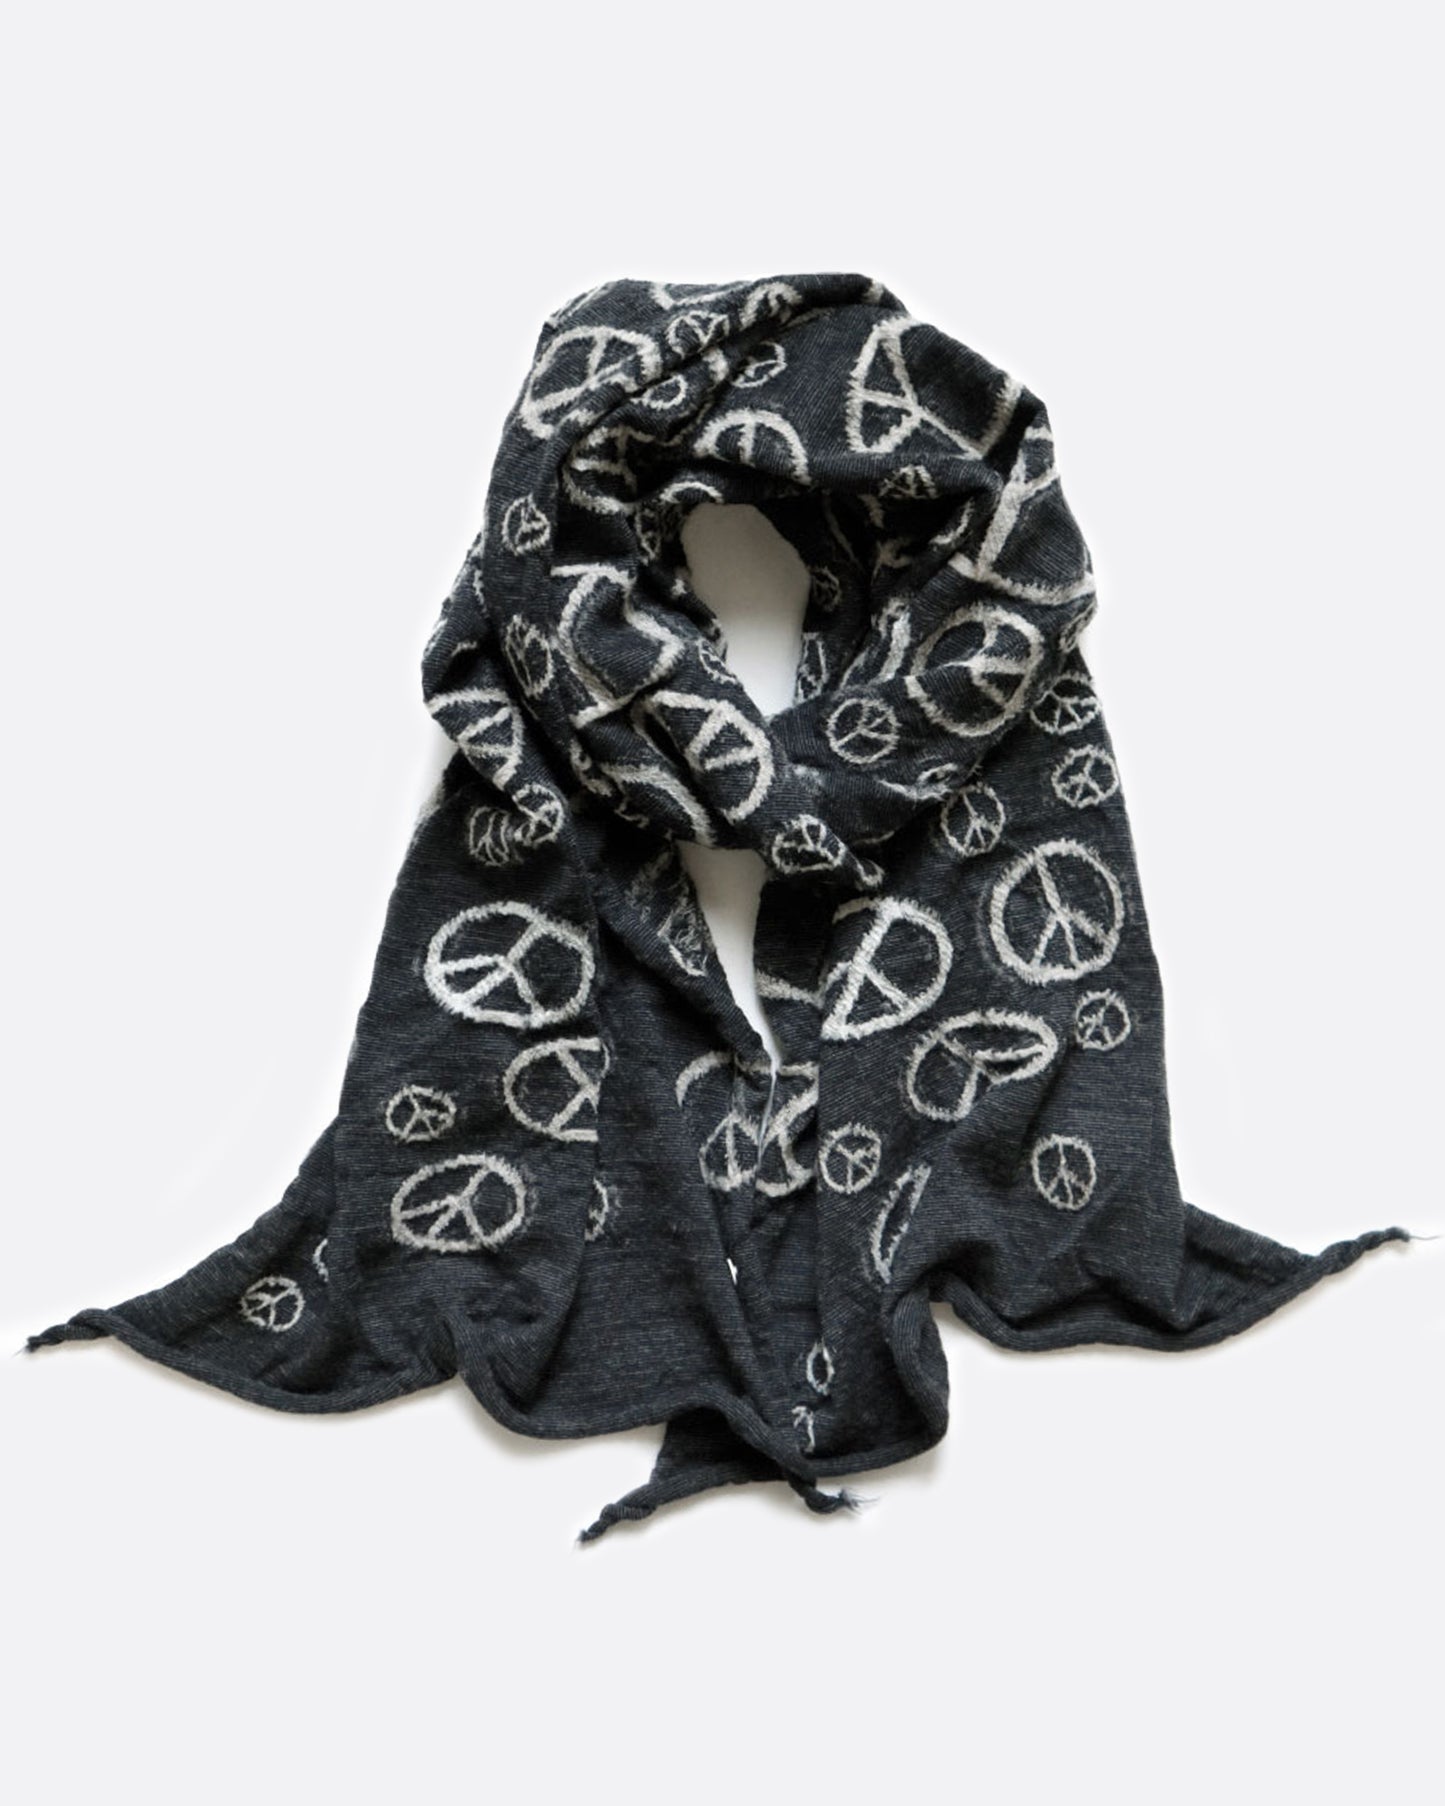 A black scarf with white peace signs, shown wrapped.